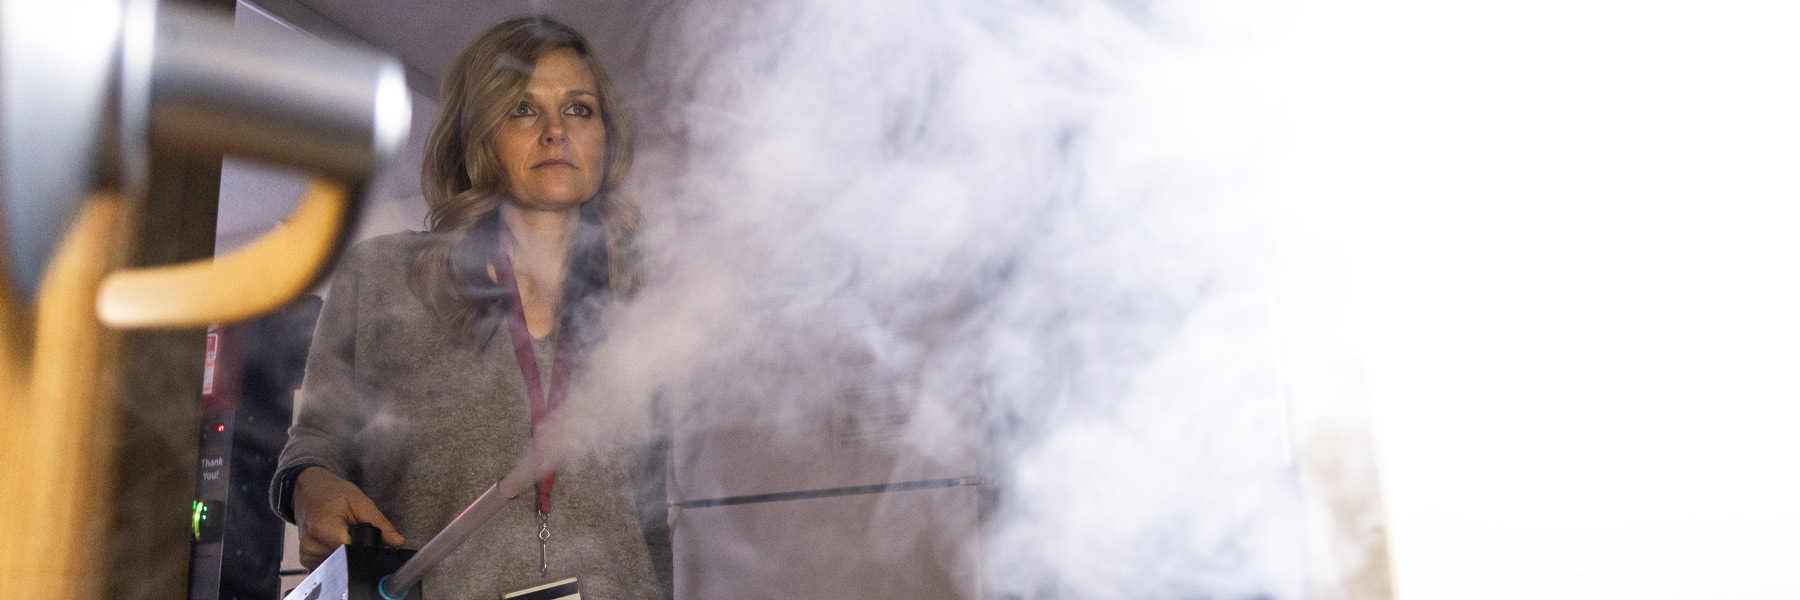 A dramatic photo of a woman using a smoke machine as part of an environmental inspection on the IU campus, early 2022.